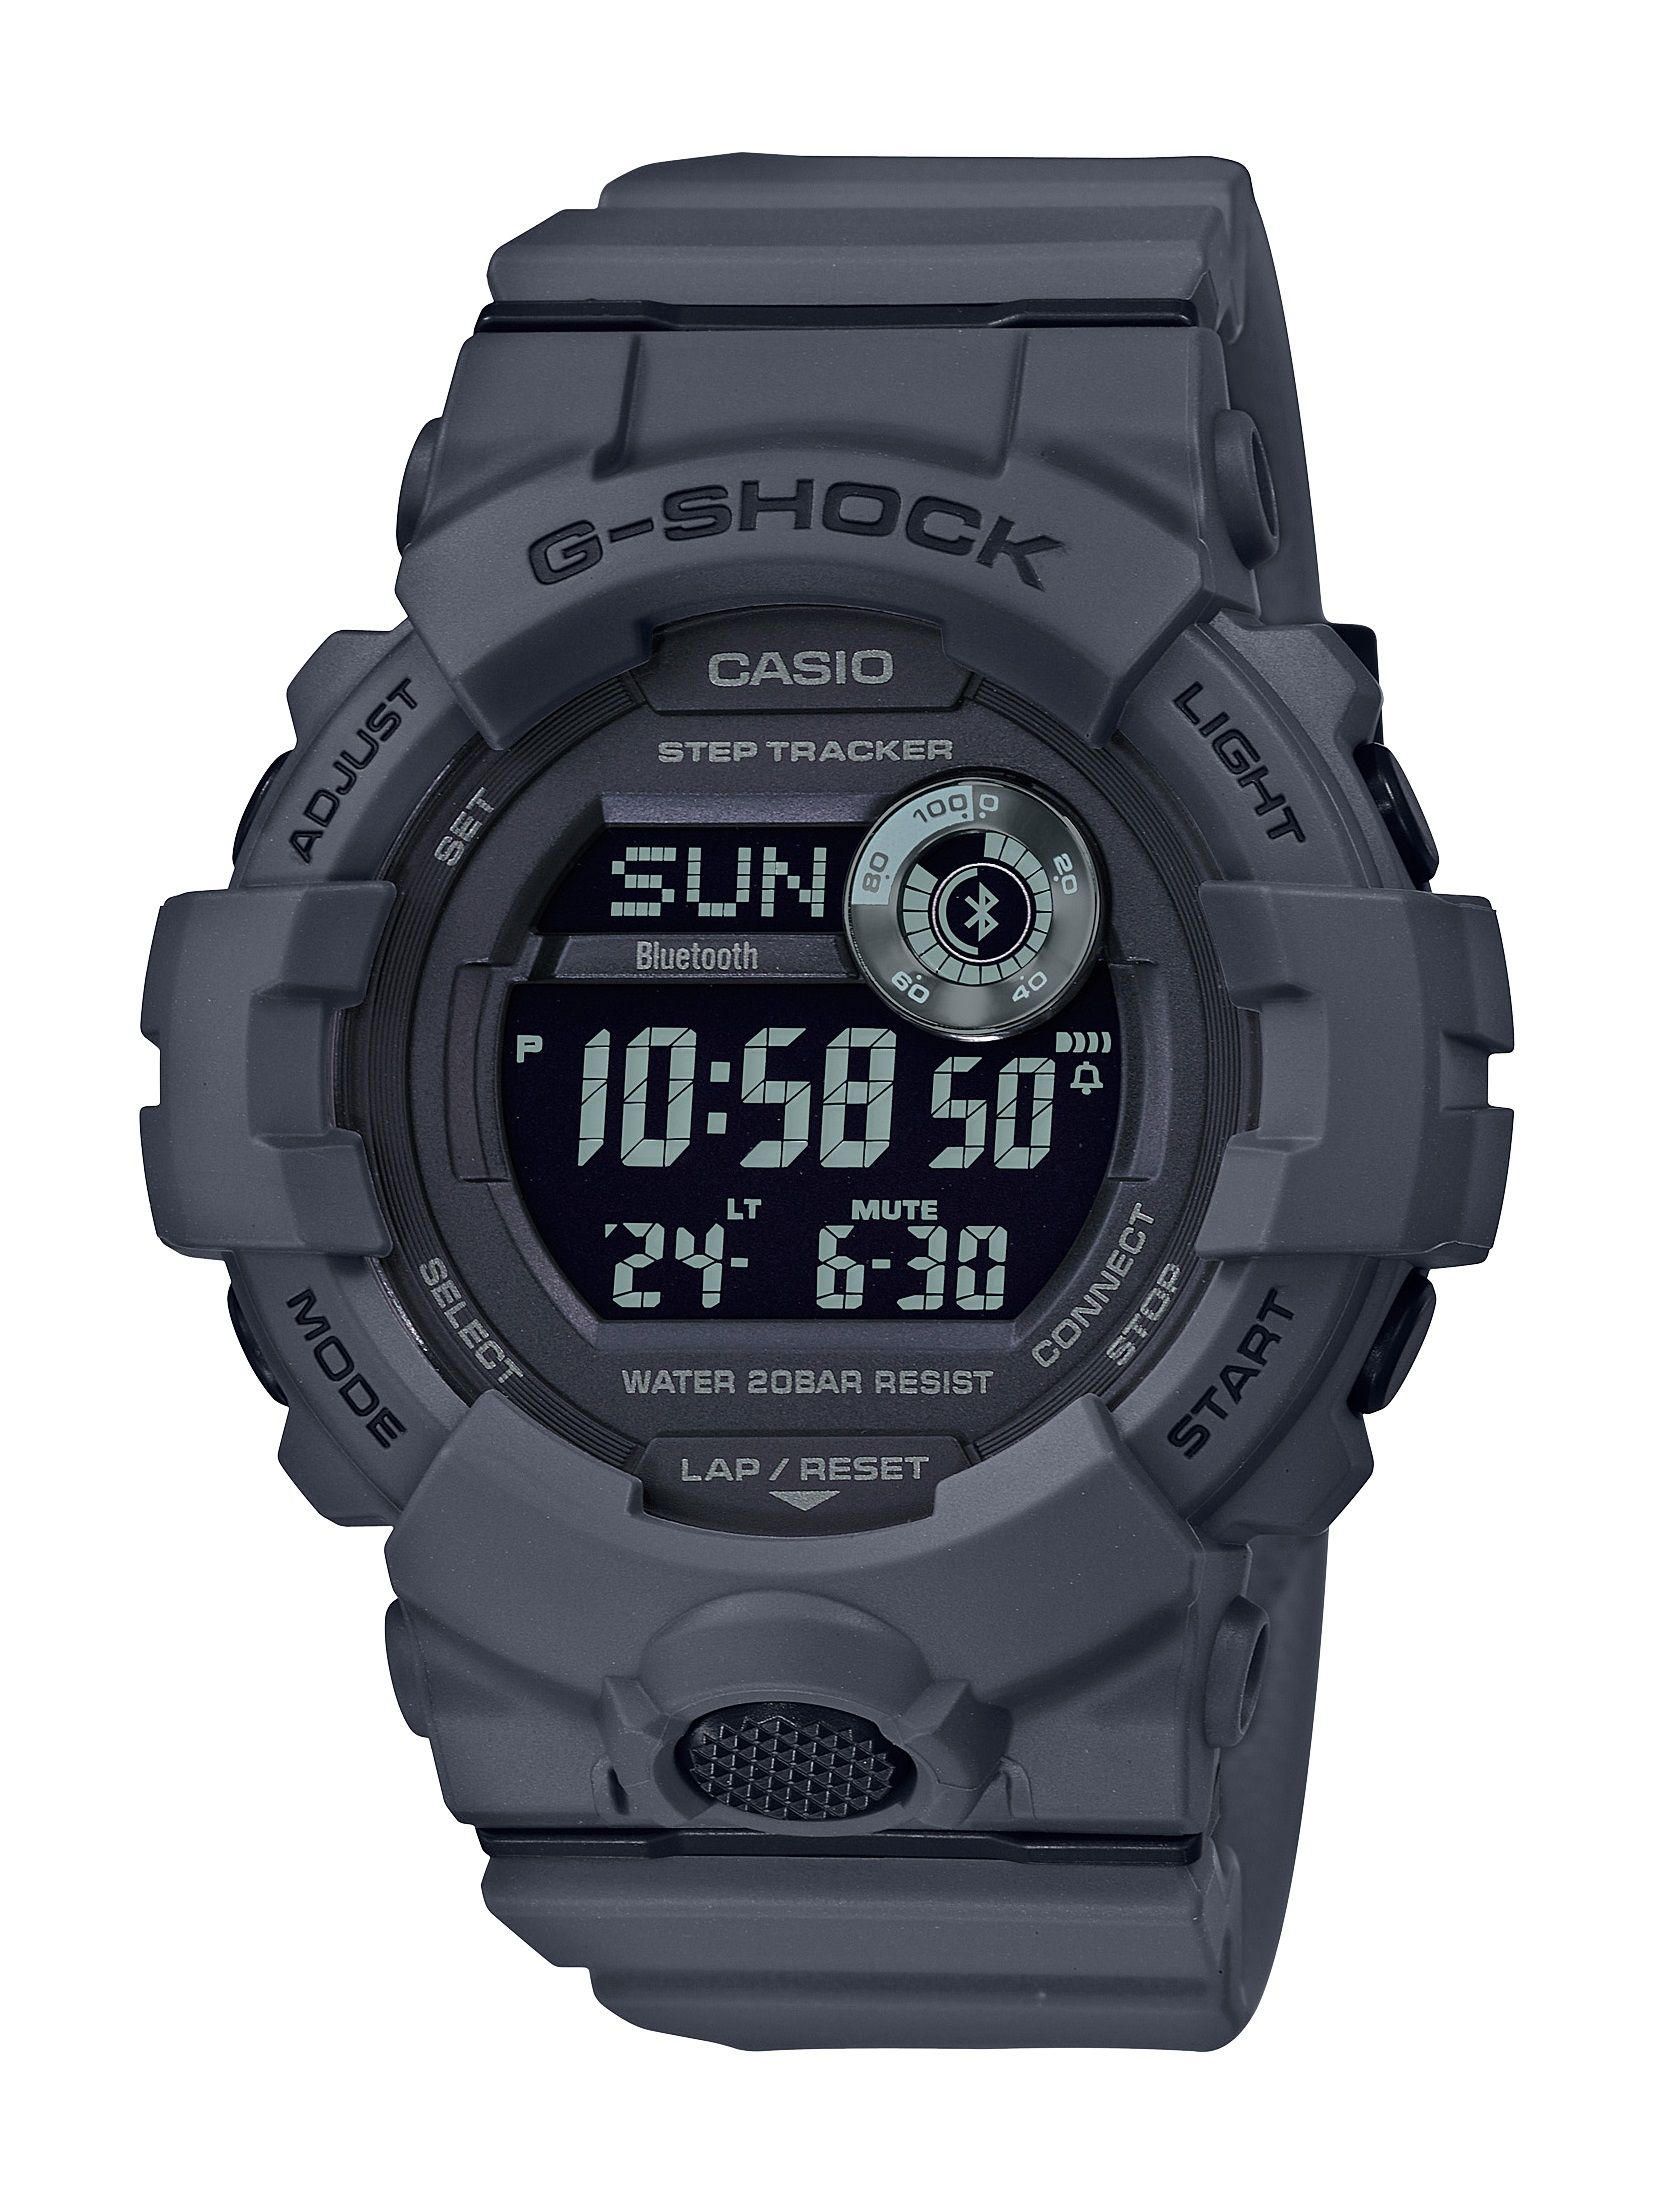 Casio G-Shock Move G-Squad Power Trainer GBD800UC with Bluetooth Mobile Link Digital Watch